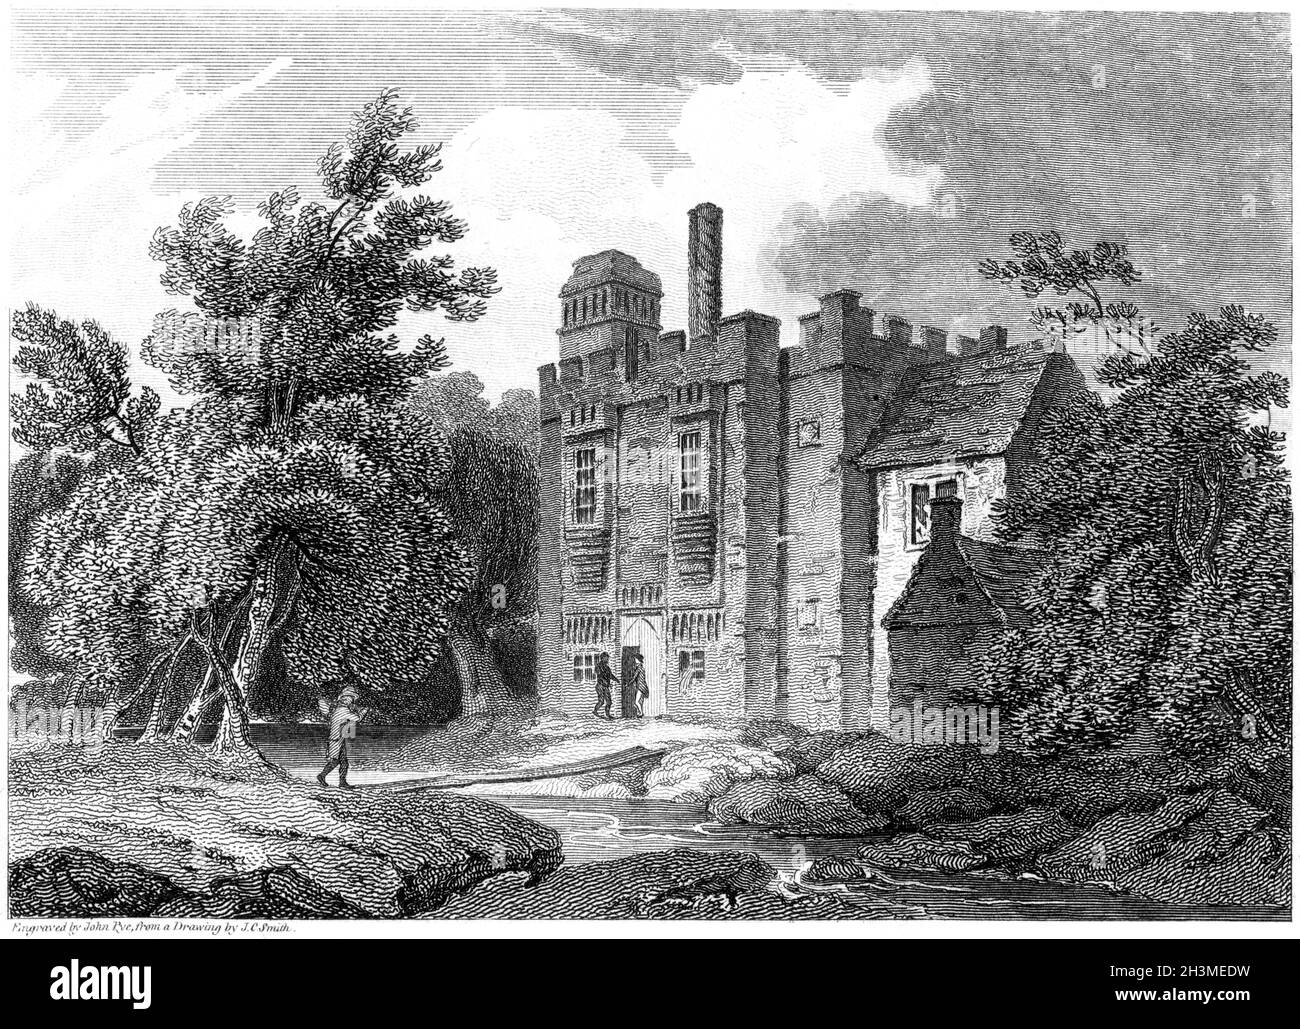 An engraving of The Rye House, Hertfordshire UK scanned at high resolution from a book printed in 1812.  Believed copyright free. Stock Photo